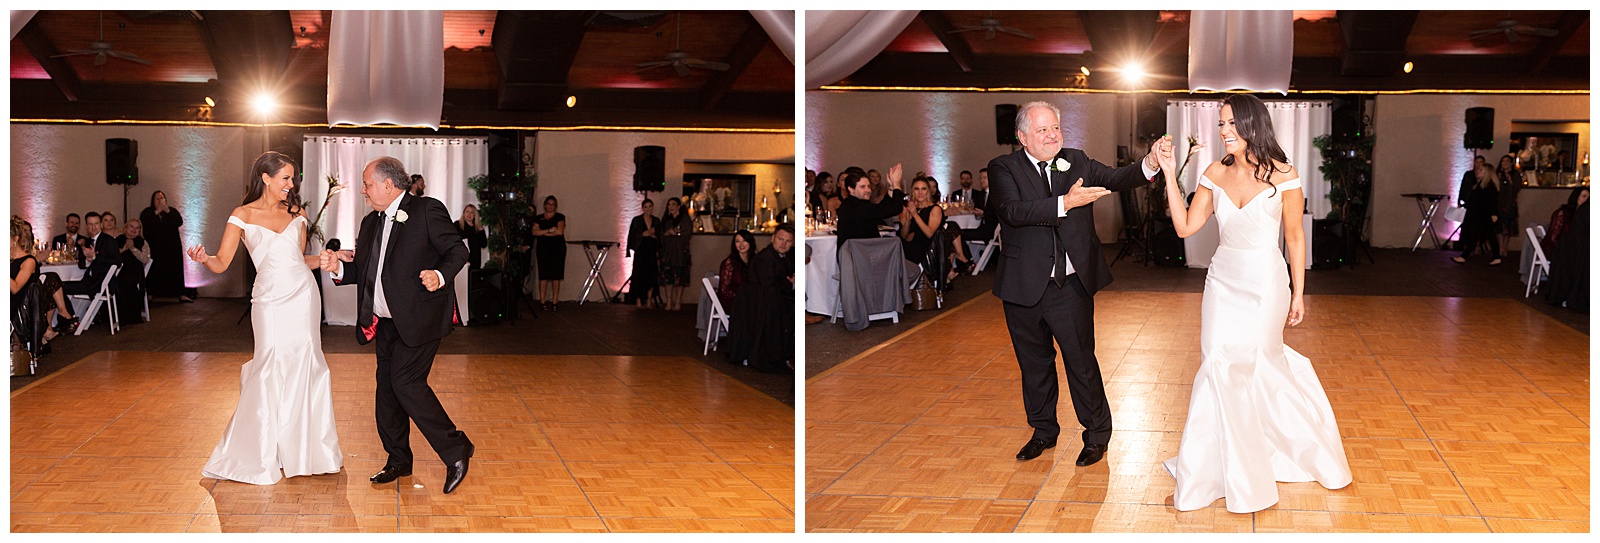 Father of the bride and bride dancing